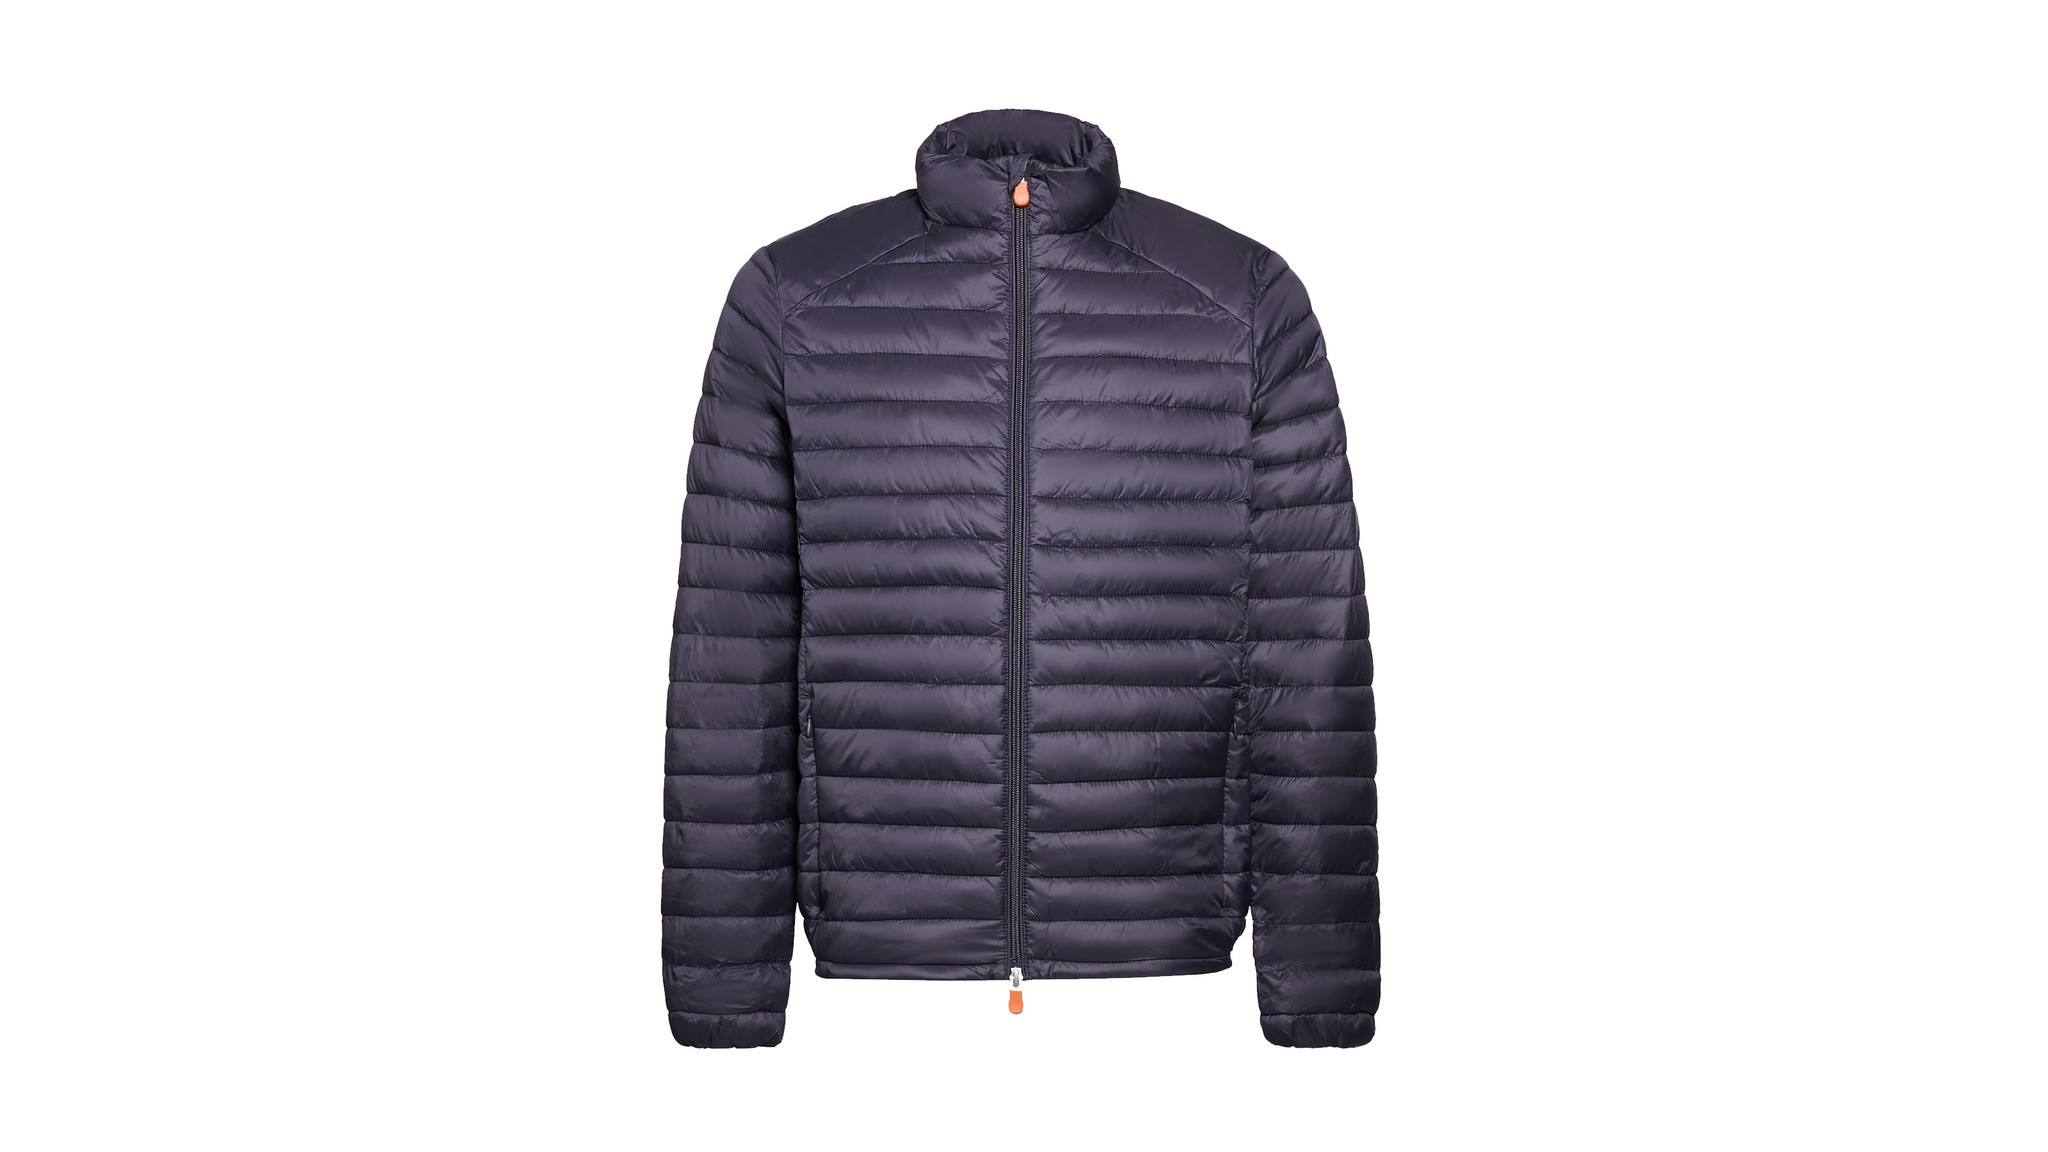 The men's Giga Puffer from Save the Duck.